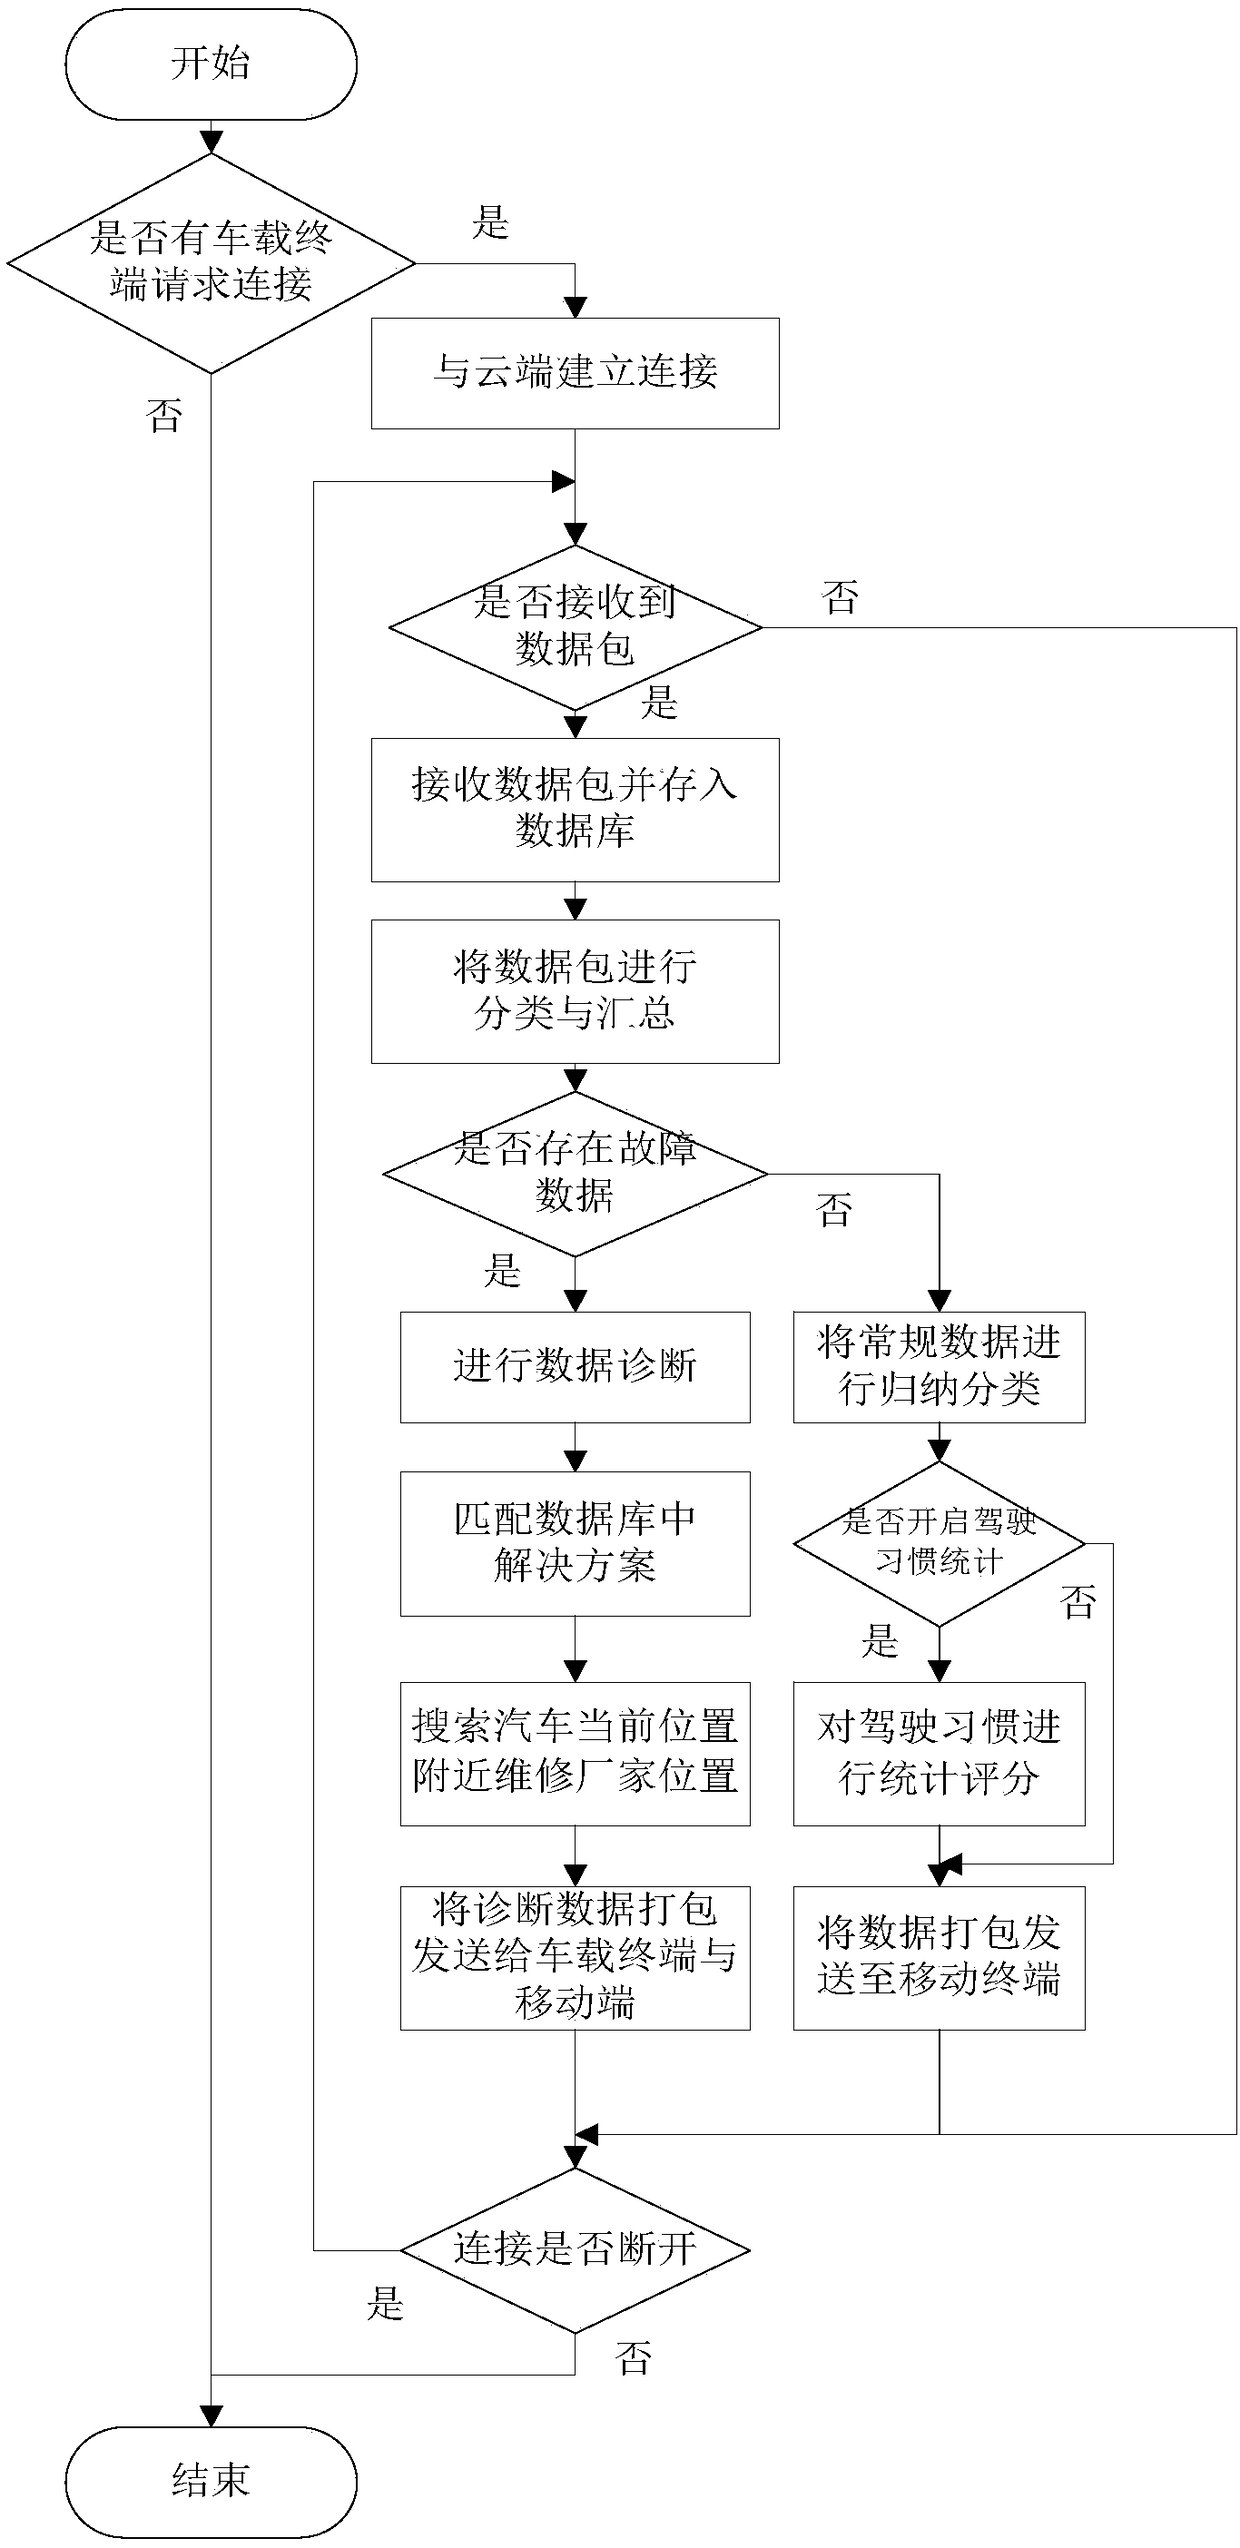 Vehicle information remote monitoring and fault diagnosis system